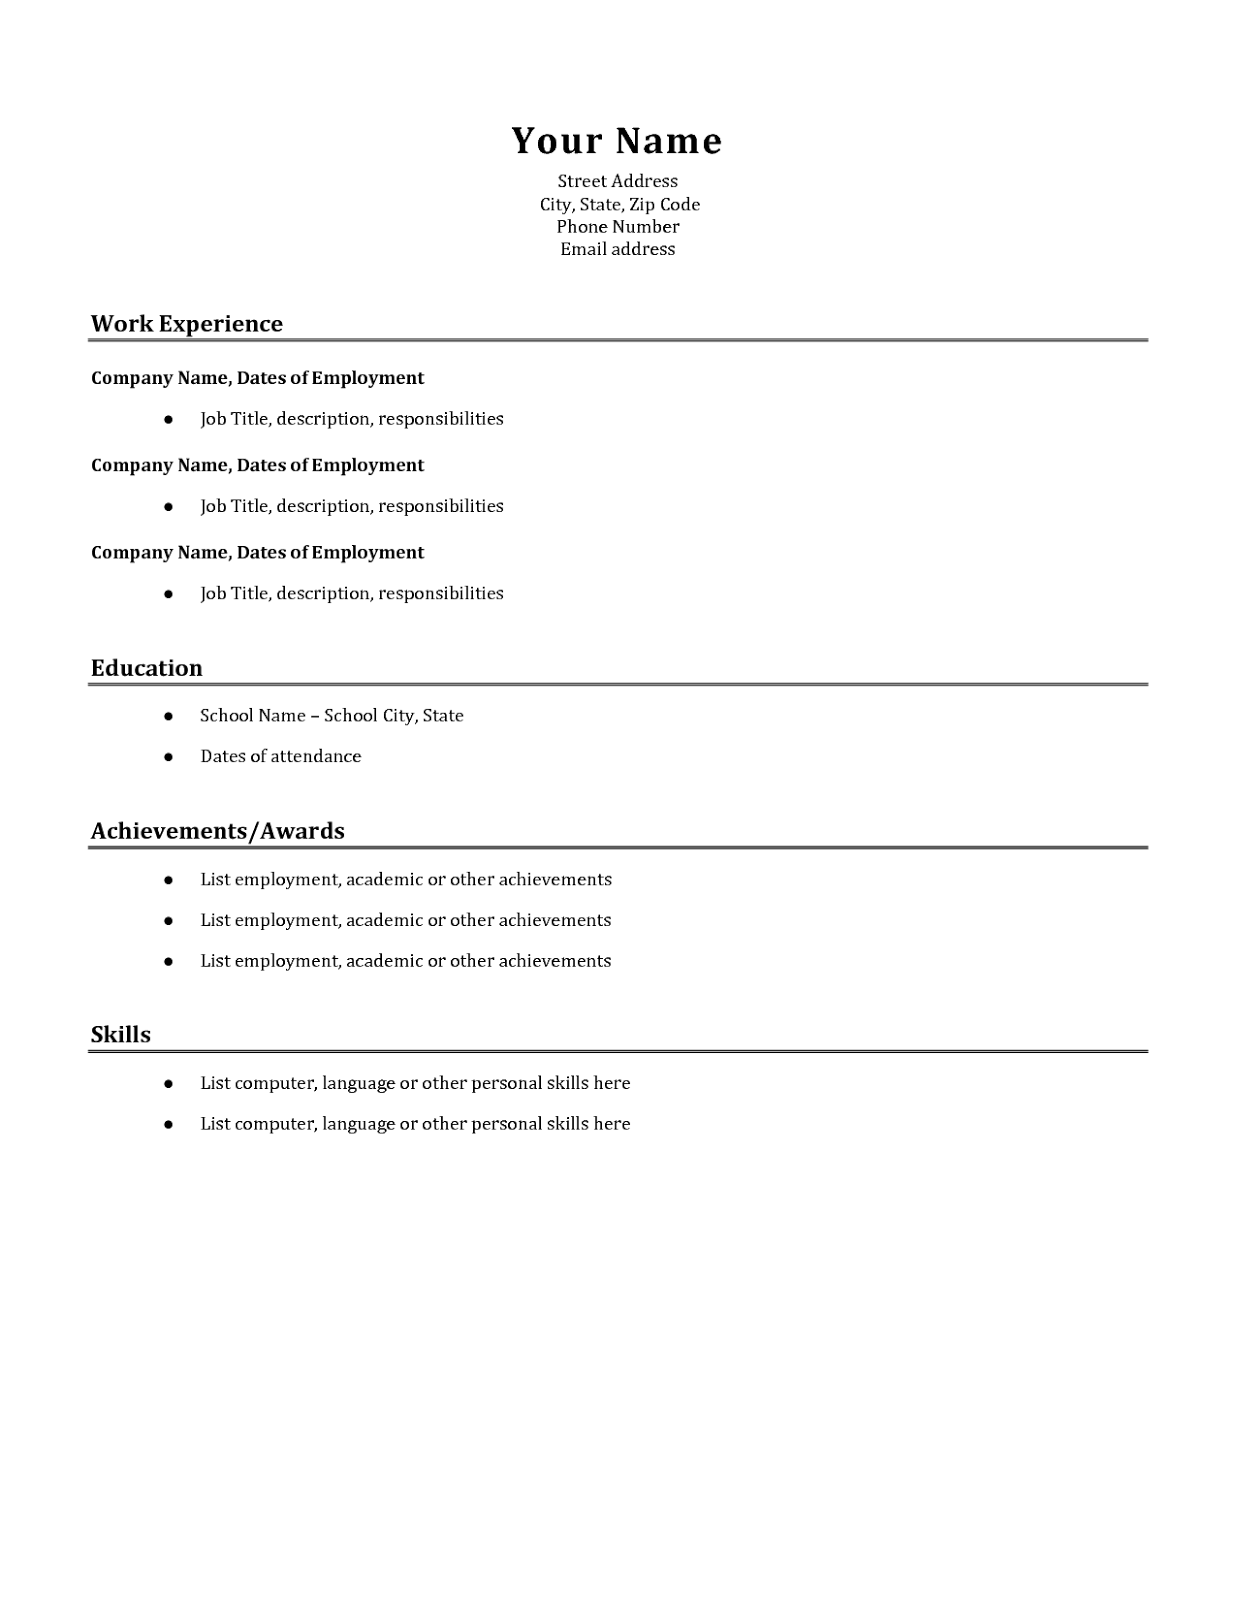 Reference page of resume samples